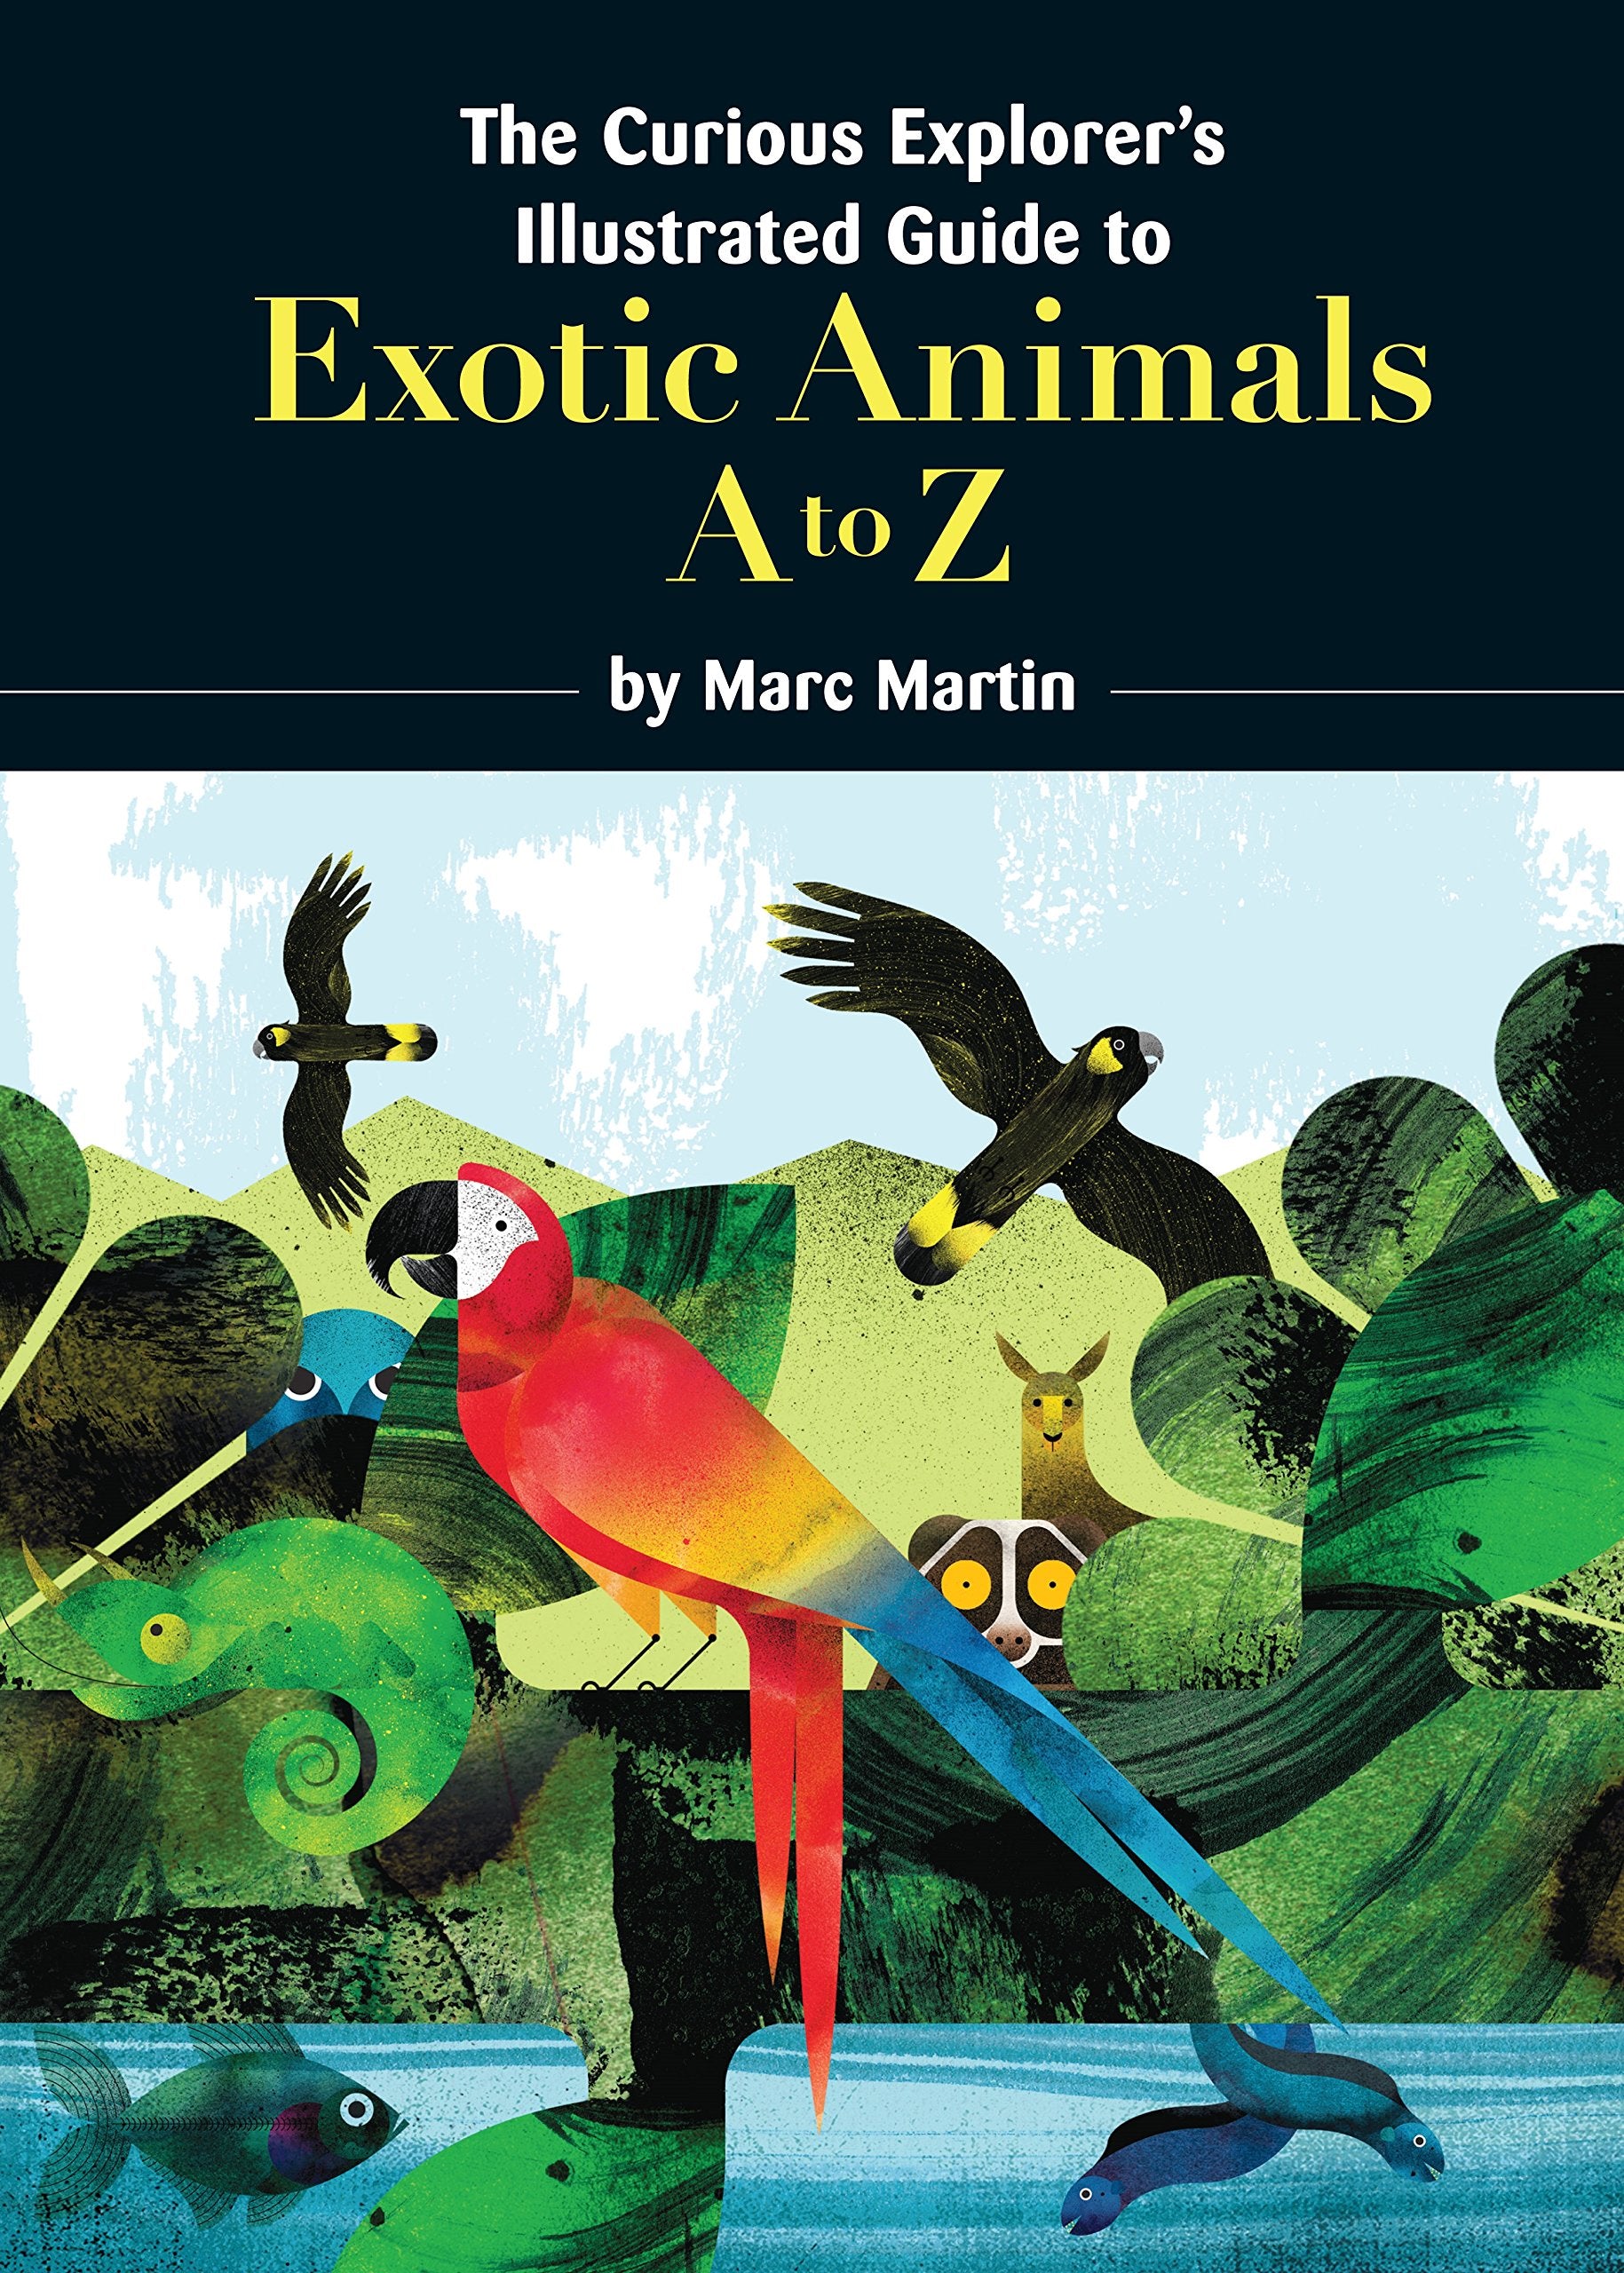 The Curious Explorer's Illustrated Guide to Exotic Animals A to Z